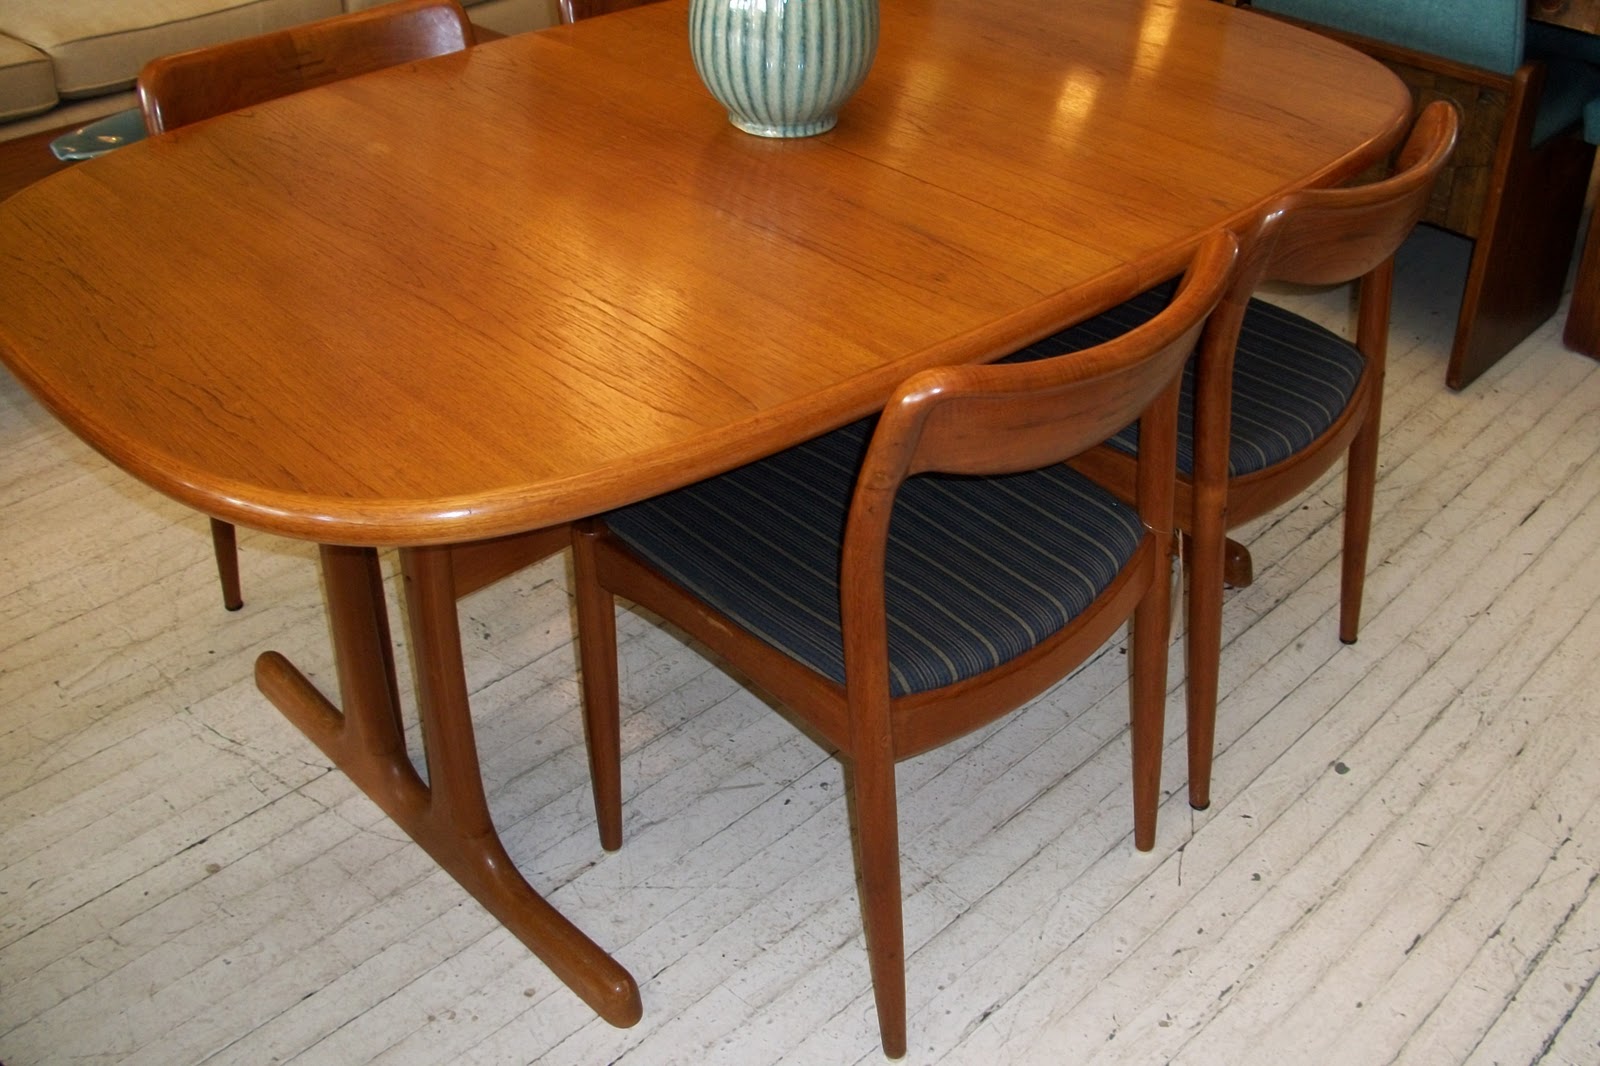 Complete Your Dining Room With A Teak Dining Table Set